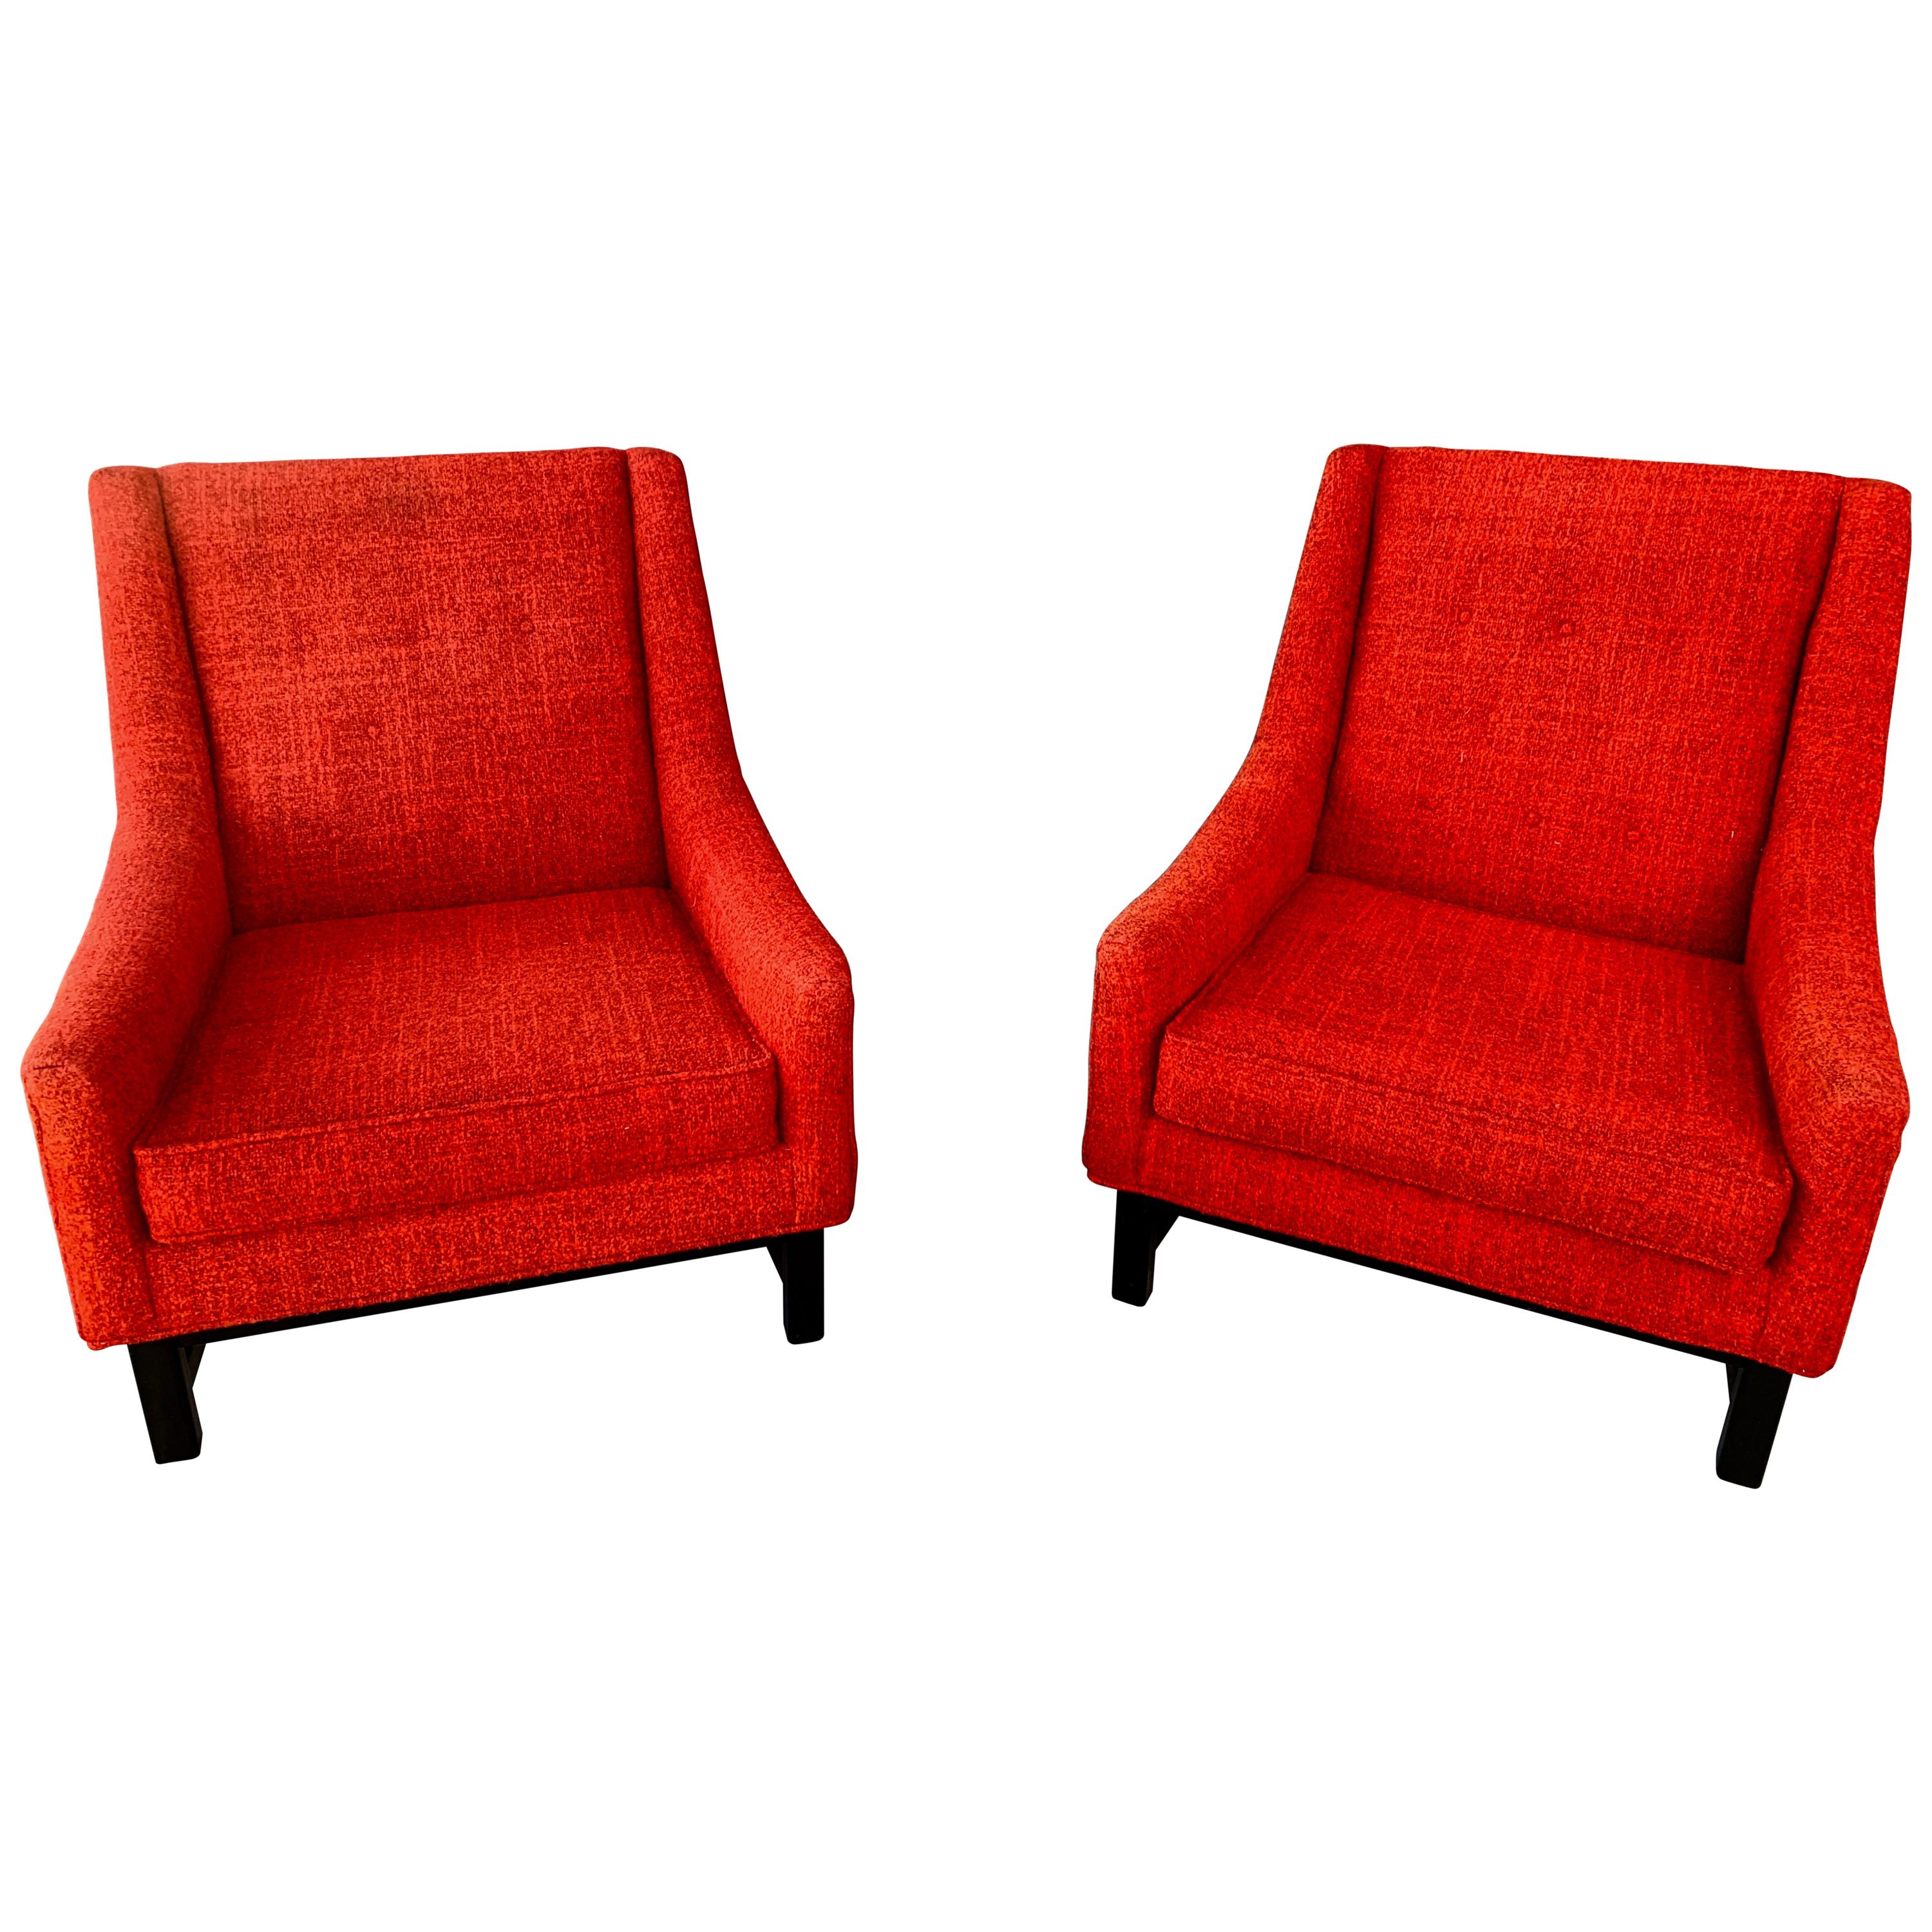 A nice looking pair of vintage red lounge or club chairs with painted oak bases. These chairs have the look of Dunbar or Adrian Pearsall but no labels as they have been re-upholstered at some point in the past. The fabric is slightly worn but we